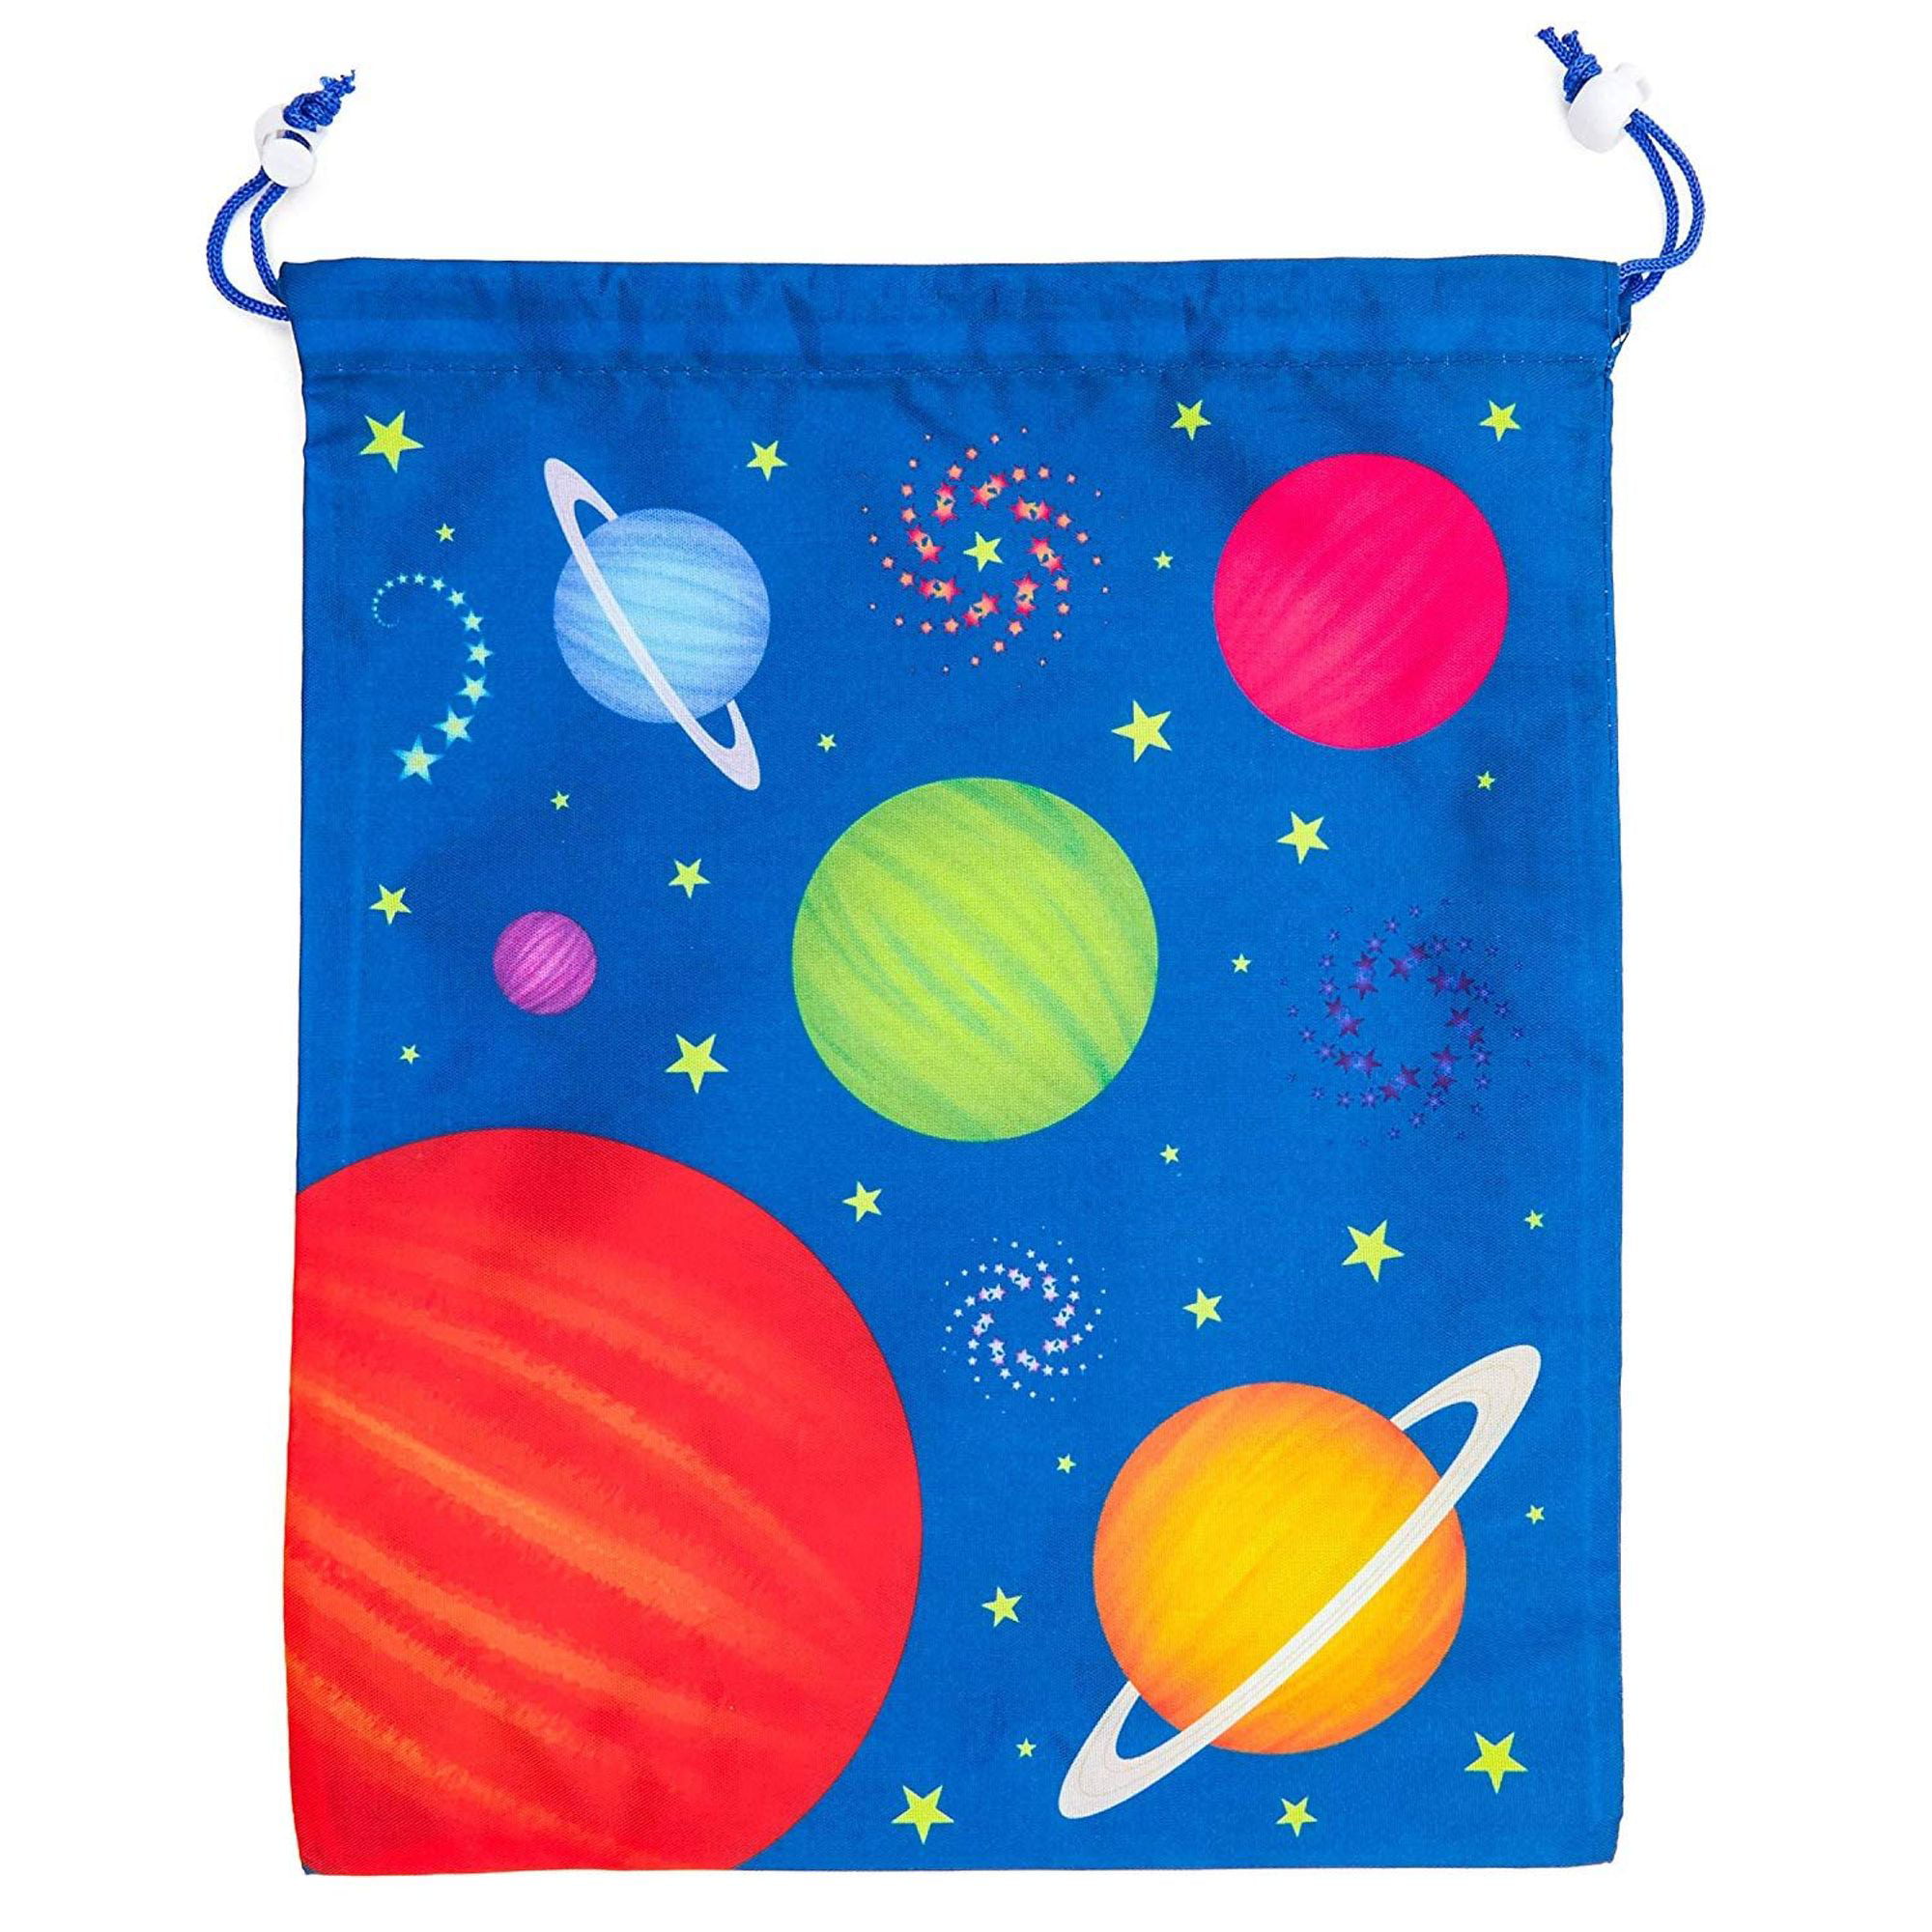 Awesome Space/Solar System Theme Party Pack 48 Solar System Bookmarks/12 Space Pencils/12 Space Station Notebooks & 12 Space Goody Bags 